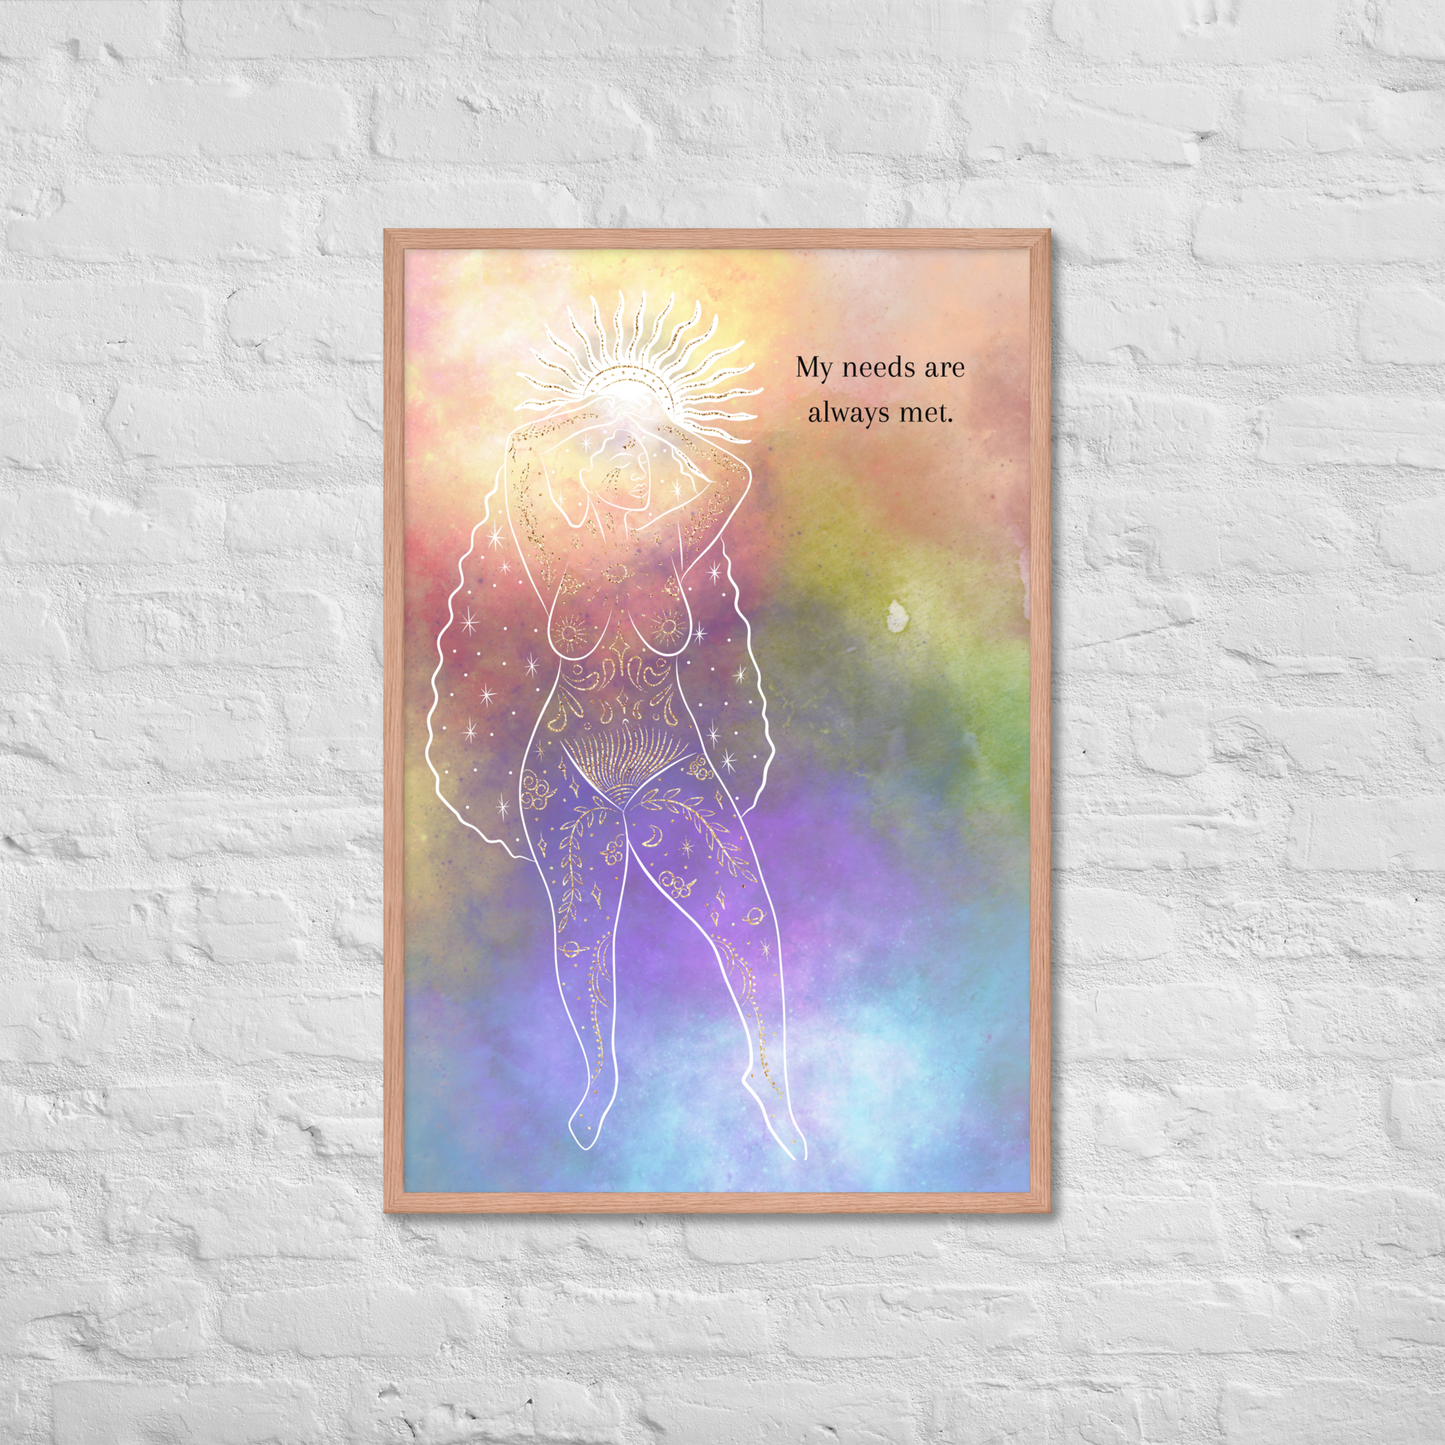 Trust the Universe Printable Wall Art - Empowering Spiritual Decor for Personal Growth & Positivity